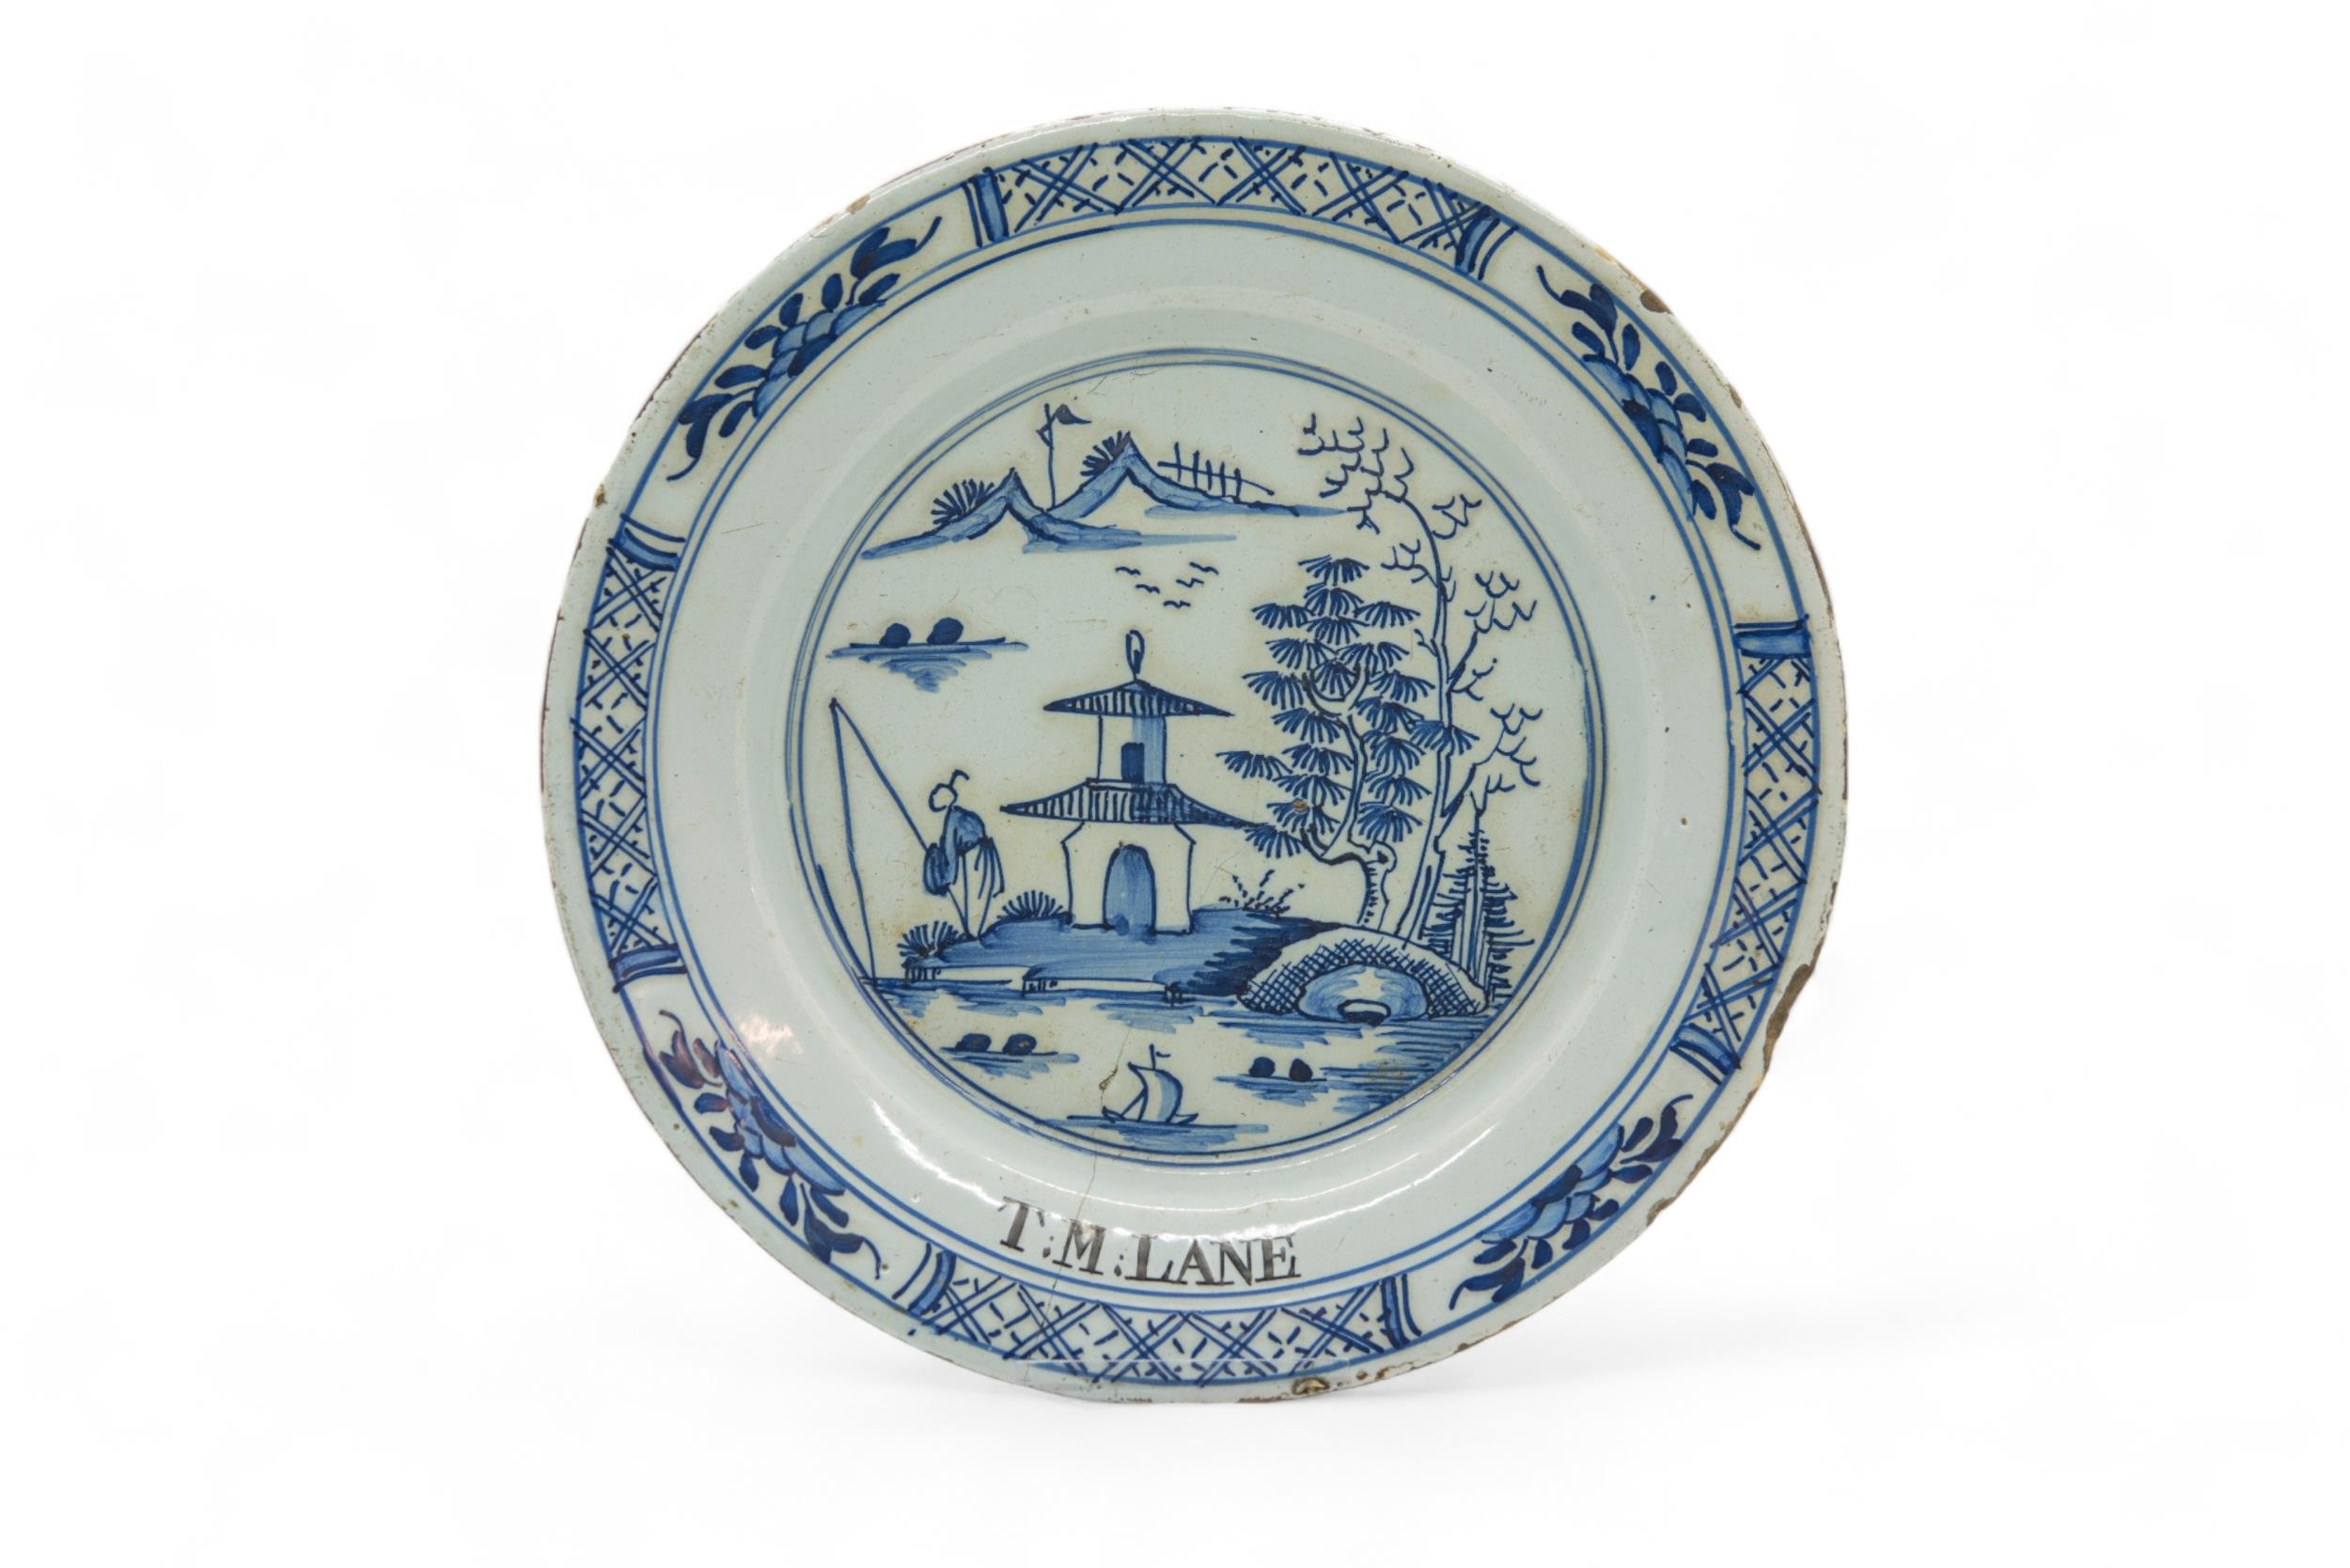 SIX DELFT PLATES 18th Century, one inscribed "T.M.LANE", 23cms wide